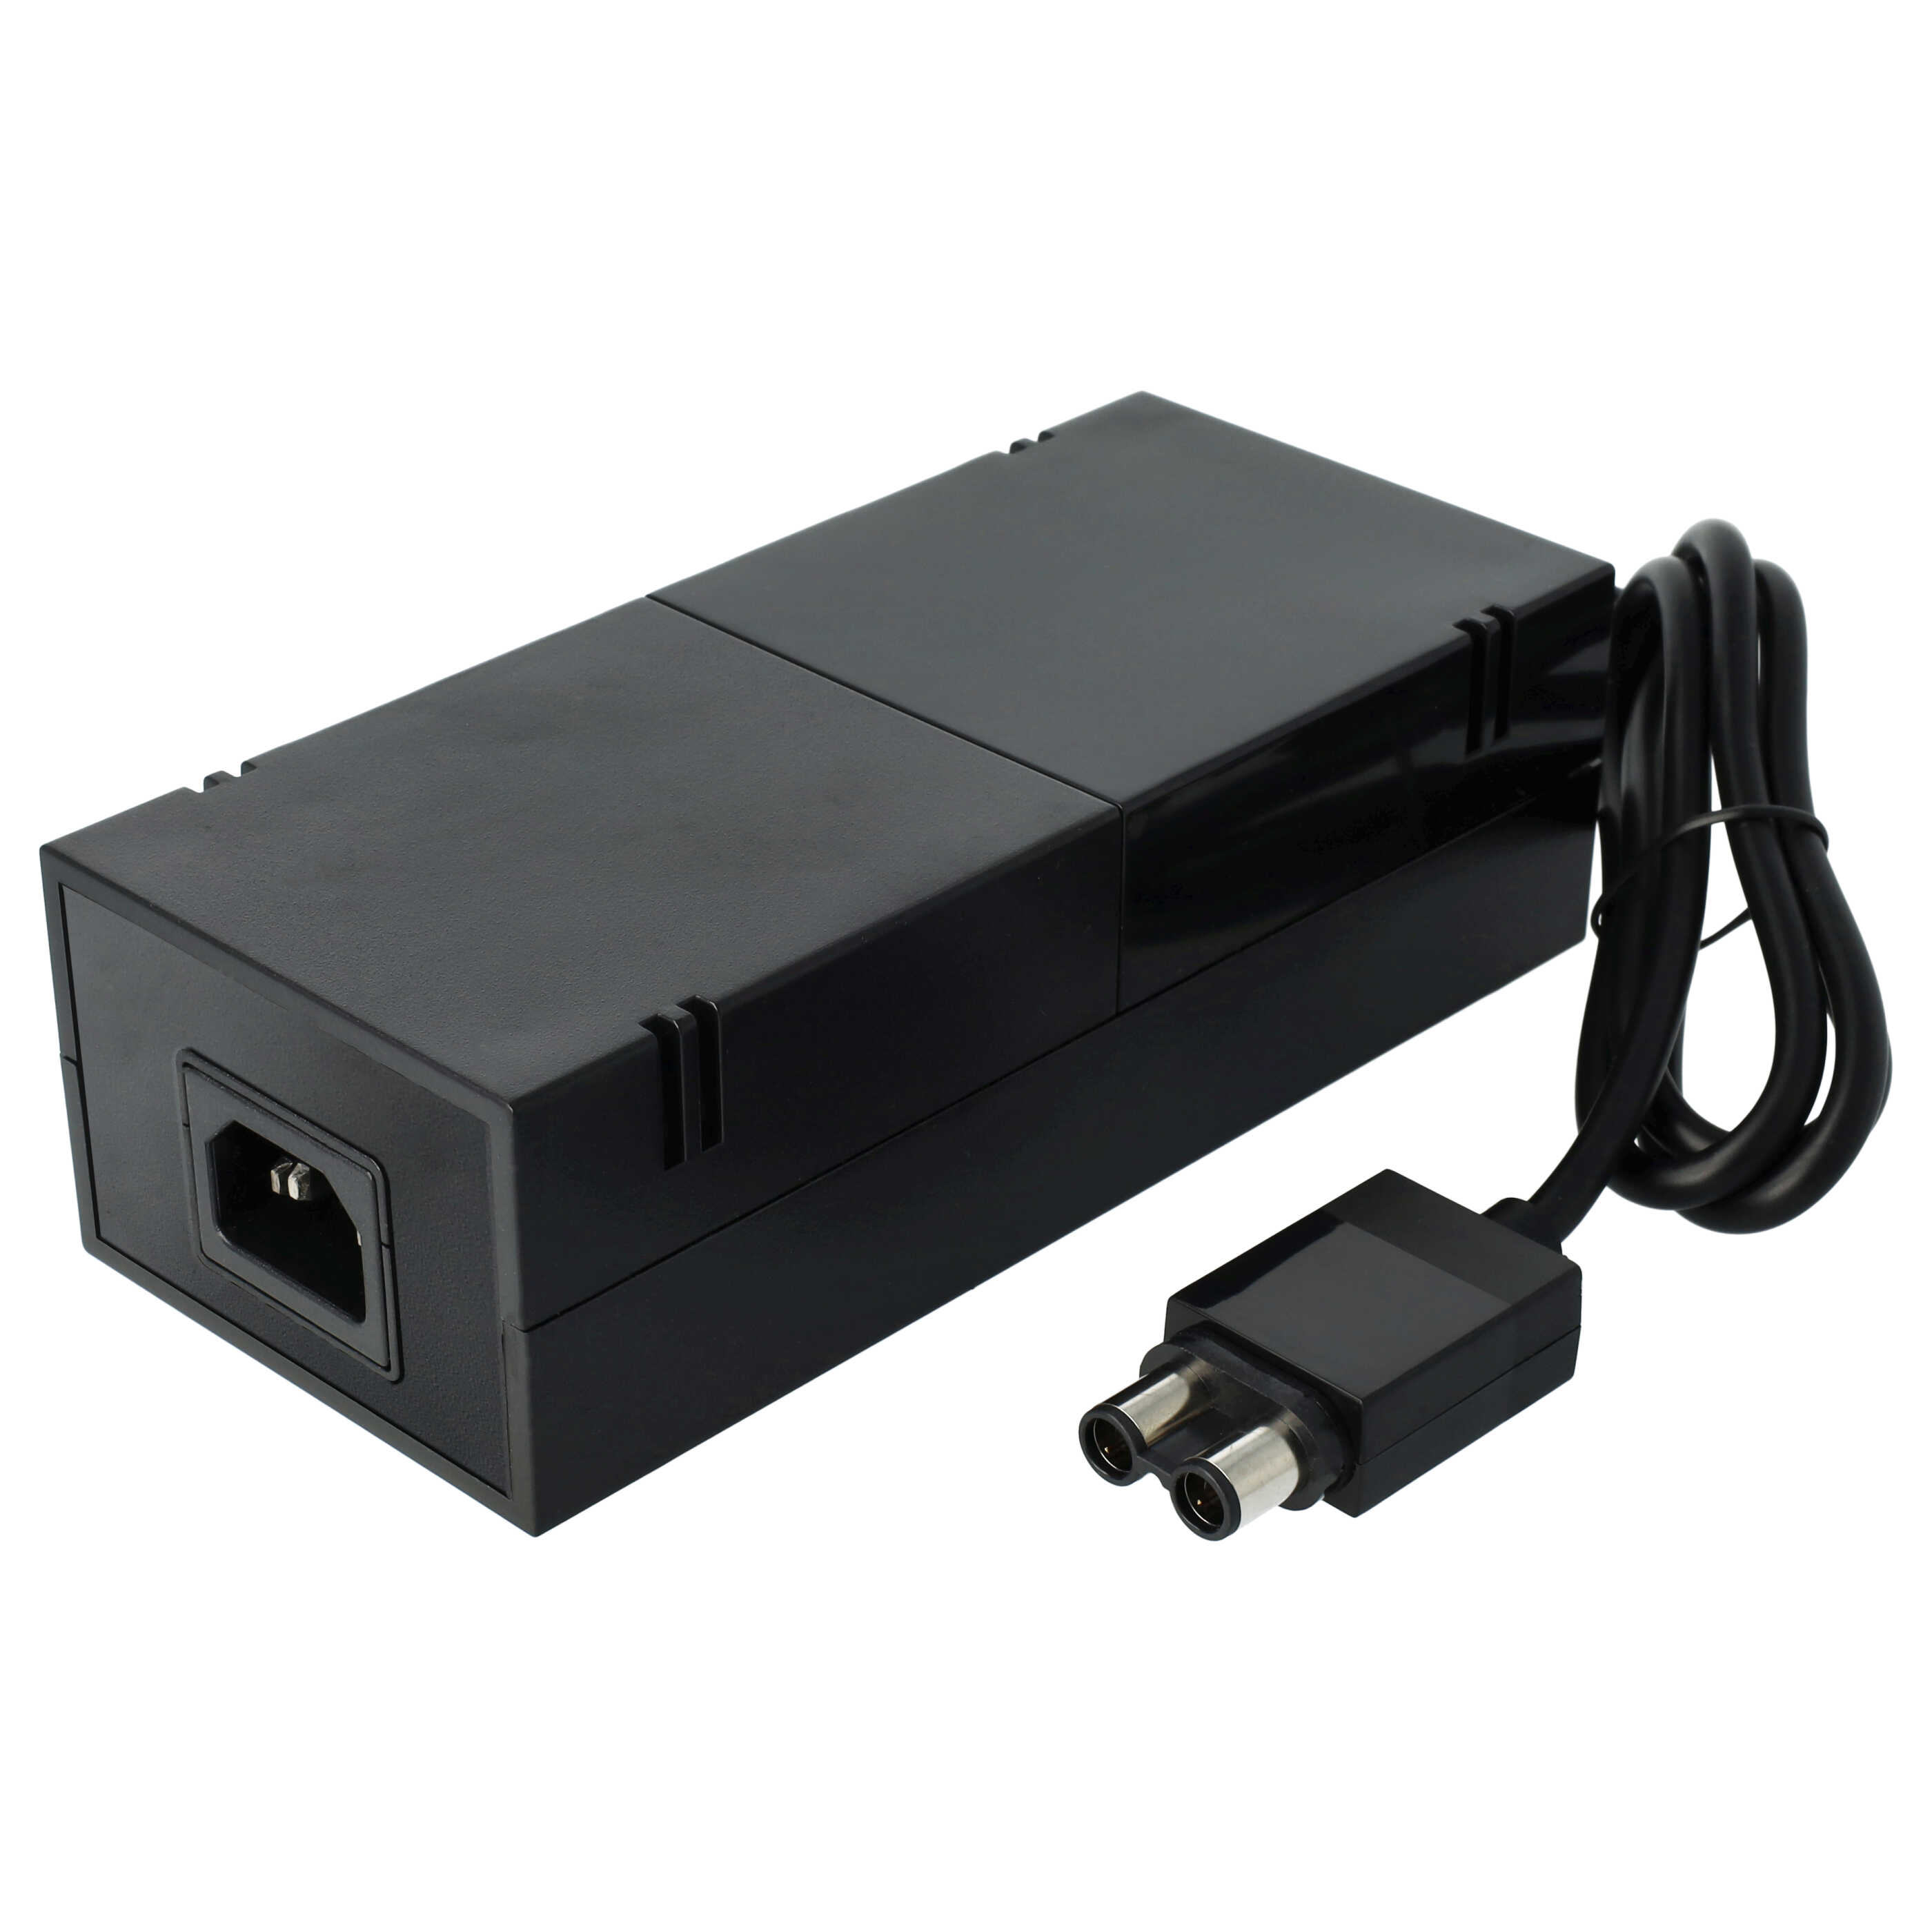 Mains Power Adapter replaces Microsoft X870396-004, PE-2121-03M1 for MicrosoftXbox One Game Console - 190 cm